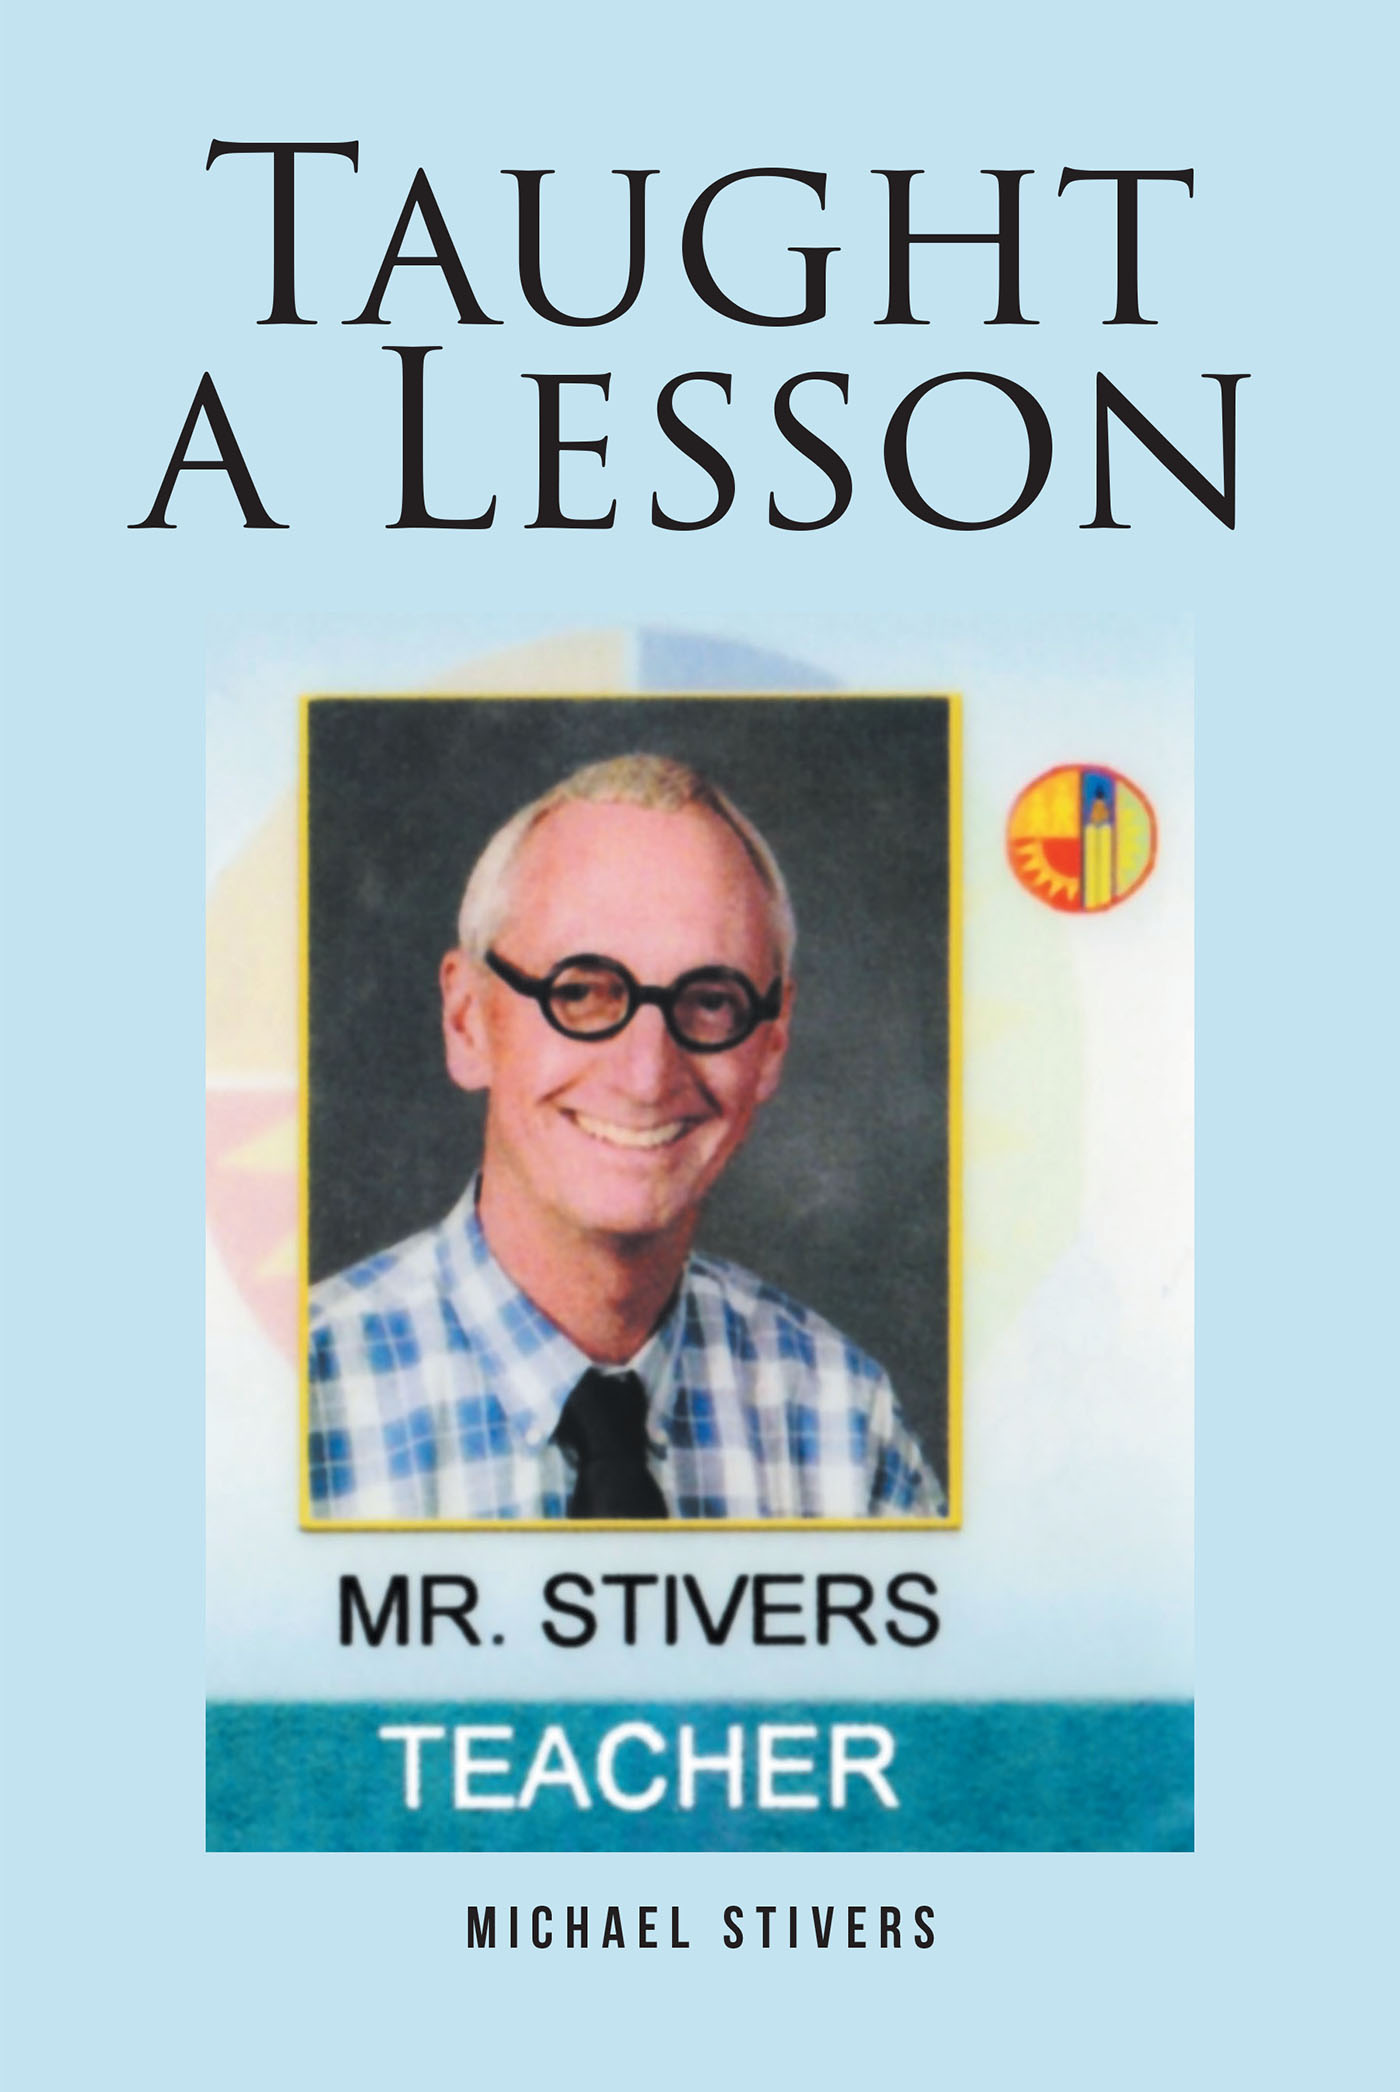 Michael Stivers’s Book "Taught a Lesson" is a Captivating True Story of the Author's Experiences as a Teacher at Boulder Elementary After a Life Altering Medical Episode